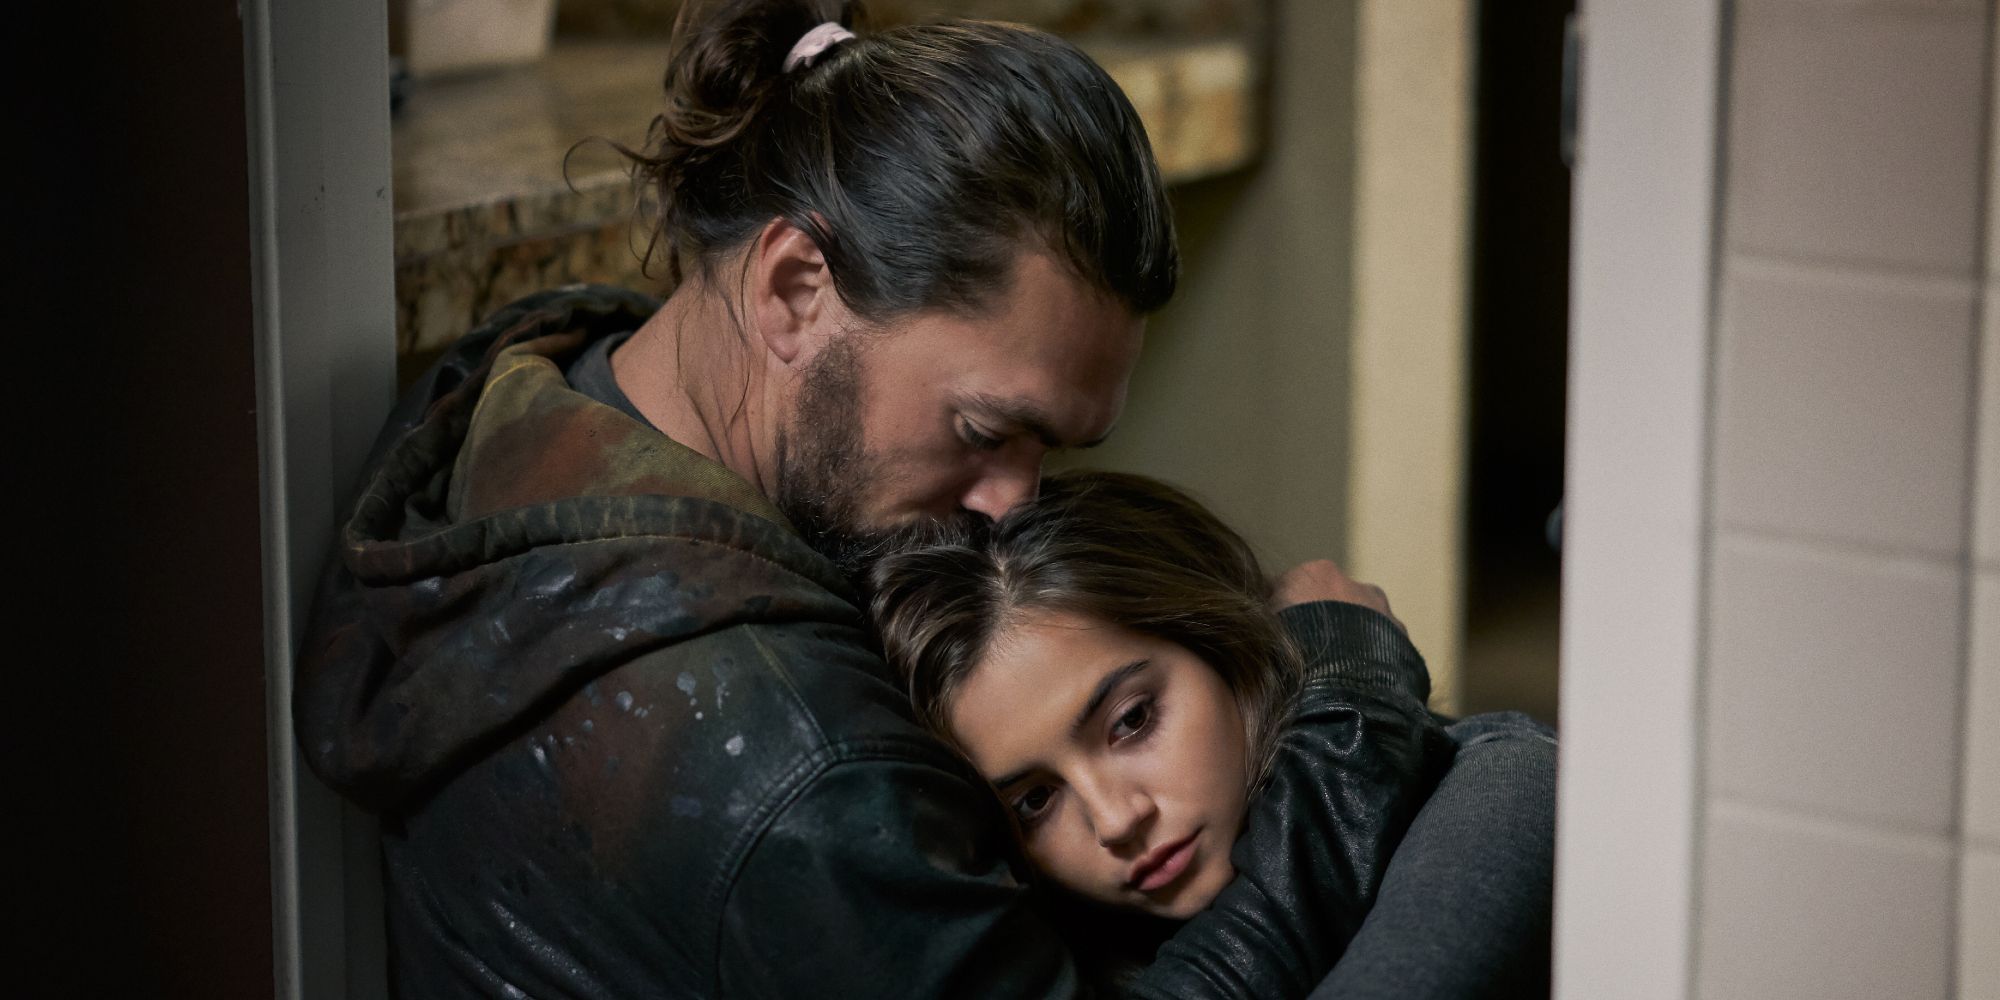 Ray comforts his daughter Rachel after Amanda's death in Sweet Girl